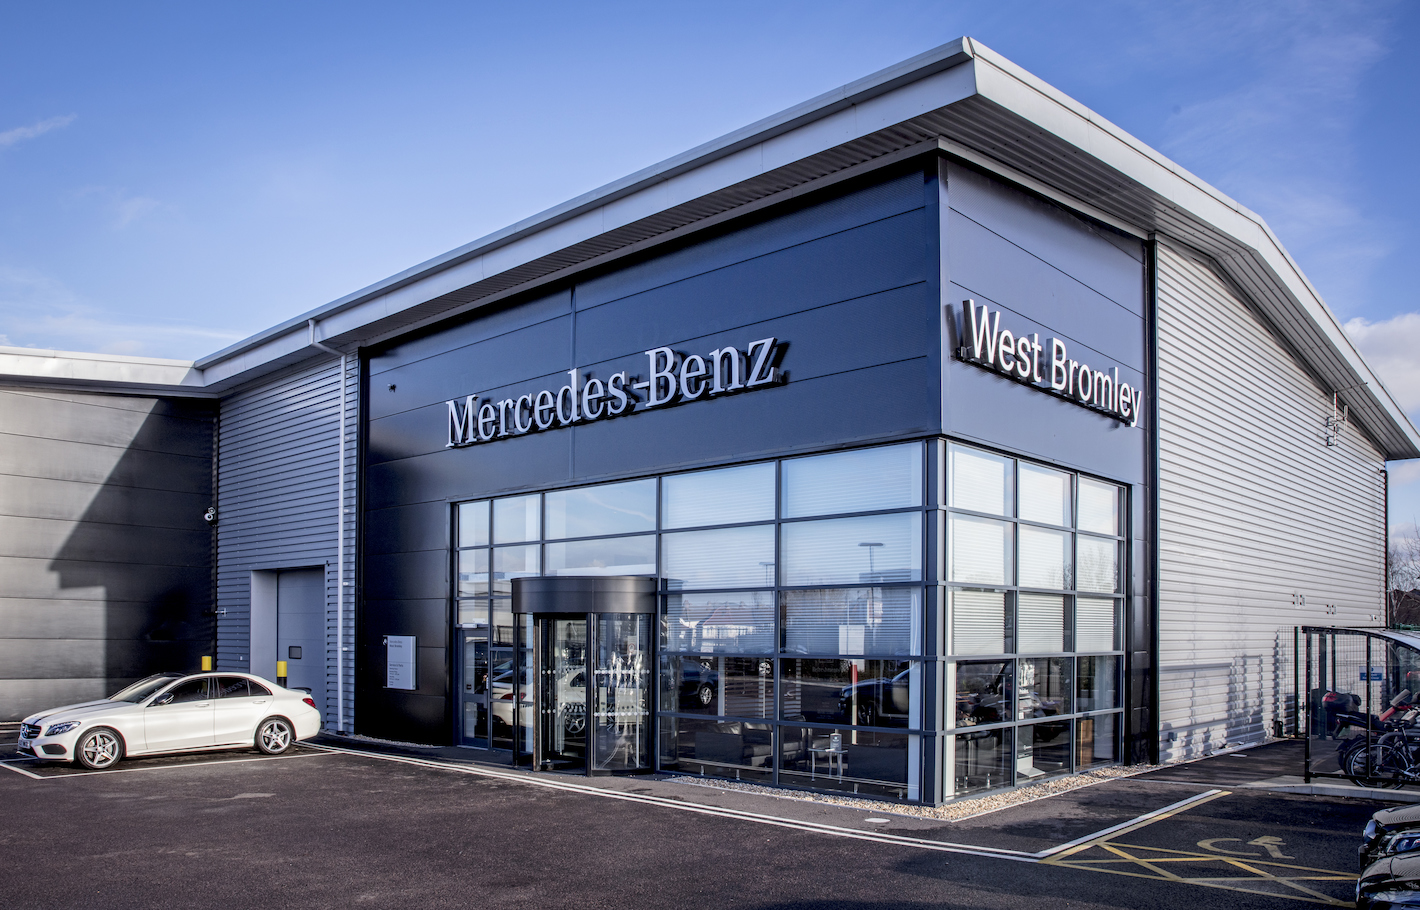 Image of Mercedes-Benz of West Bromley